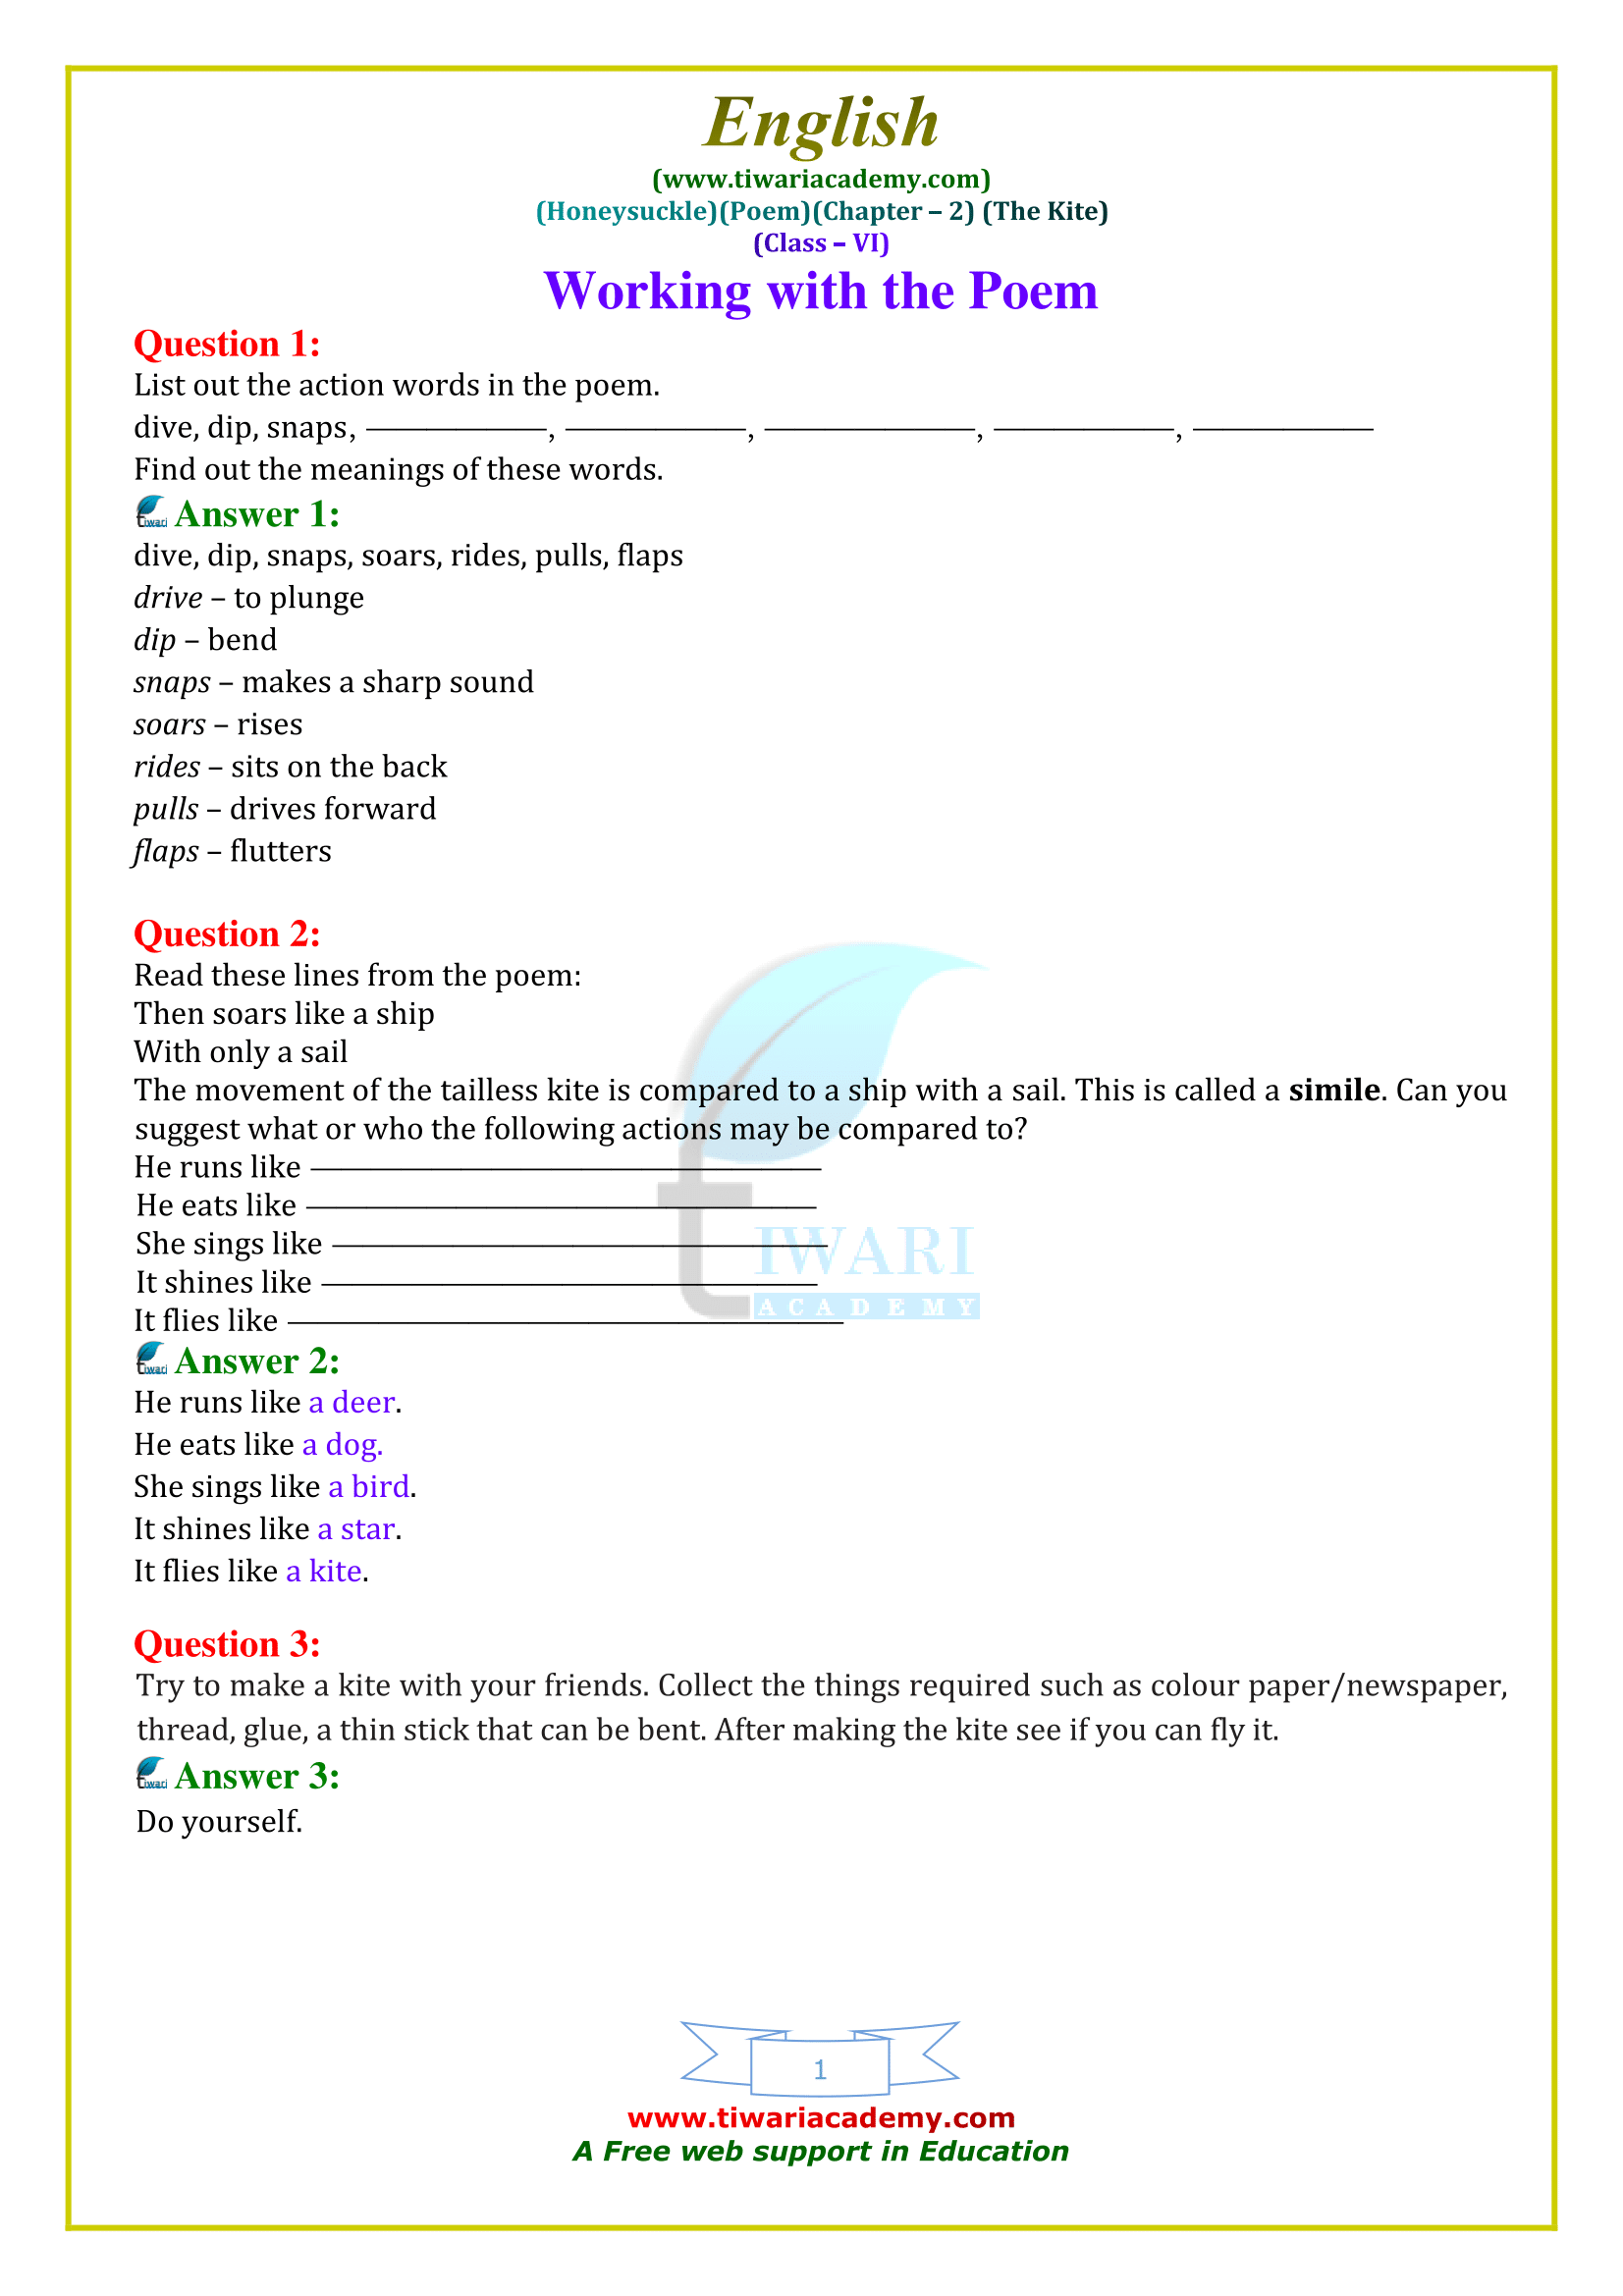 NCERT Solutions for Class 6 English Honeysuckle Poem 2 The Kite